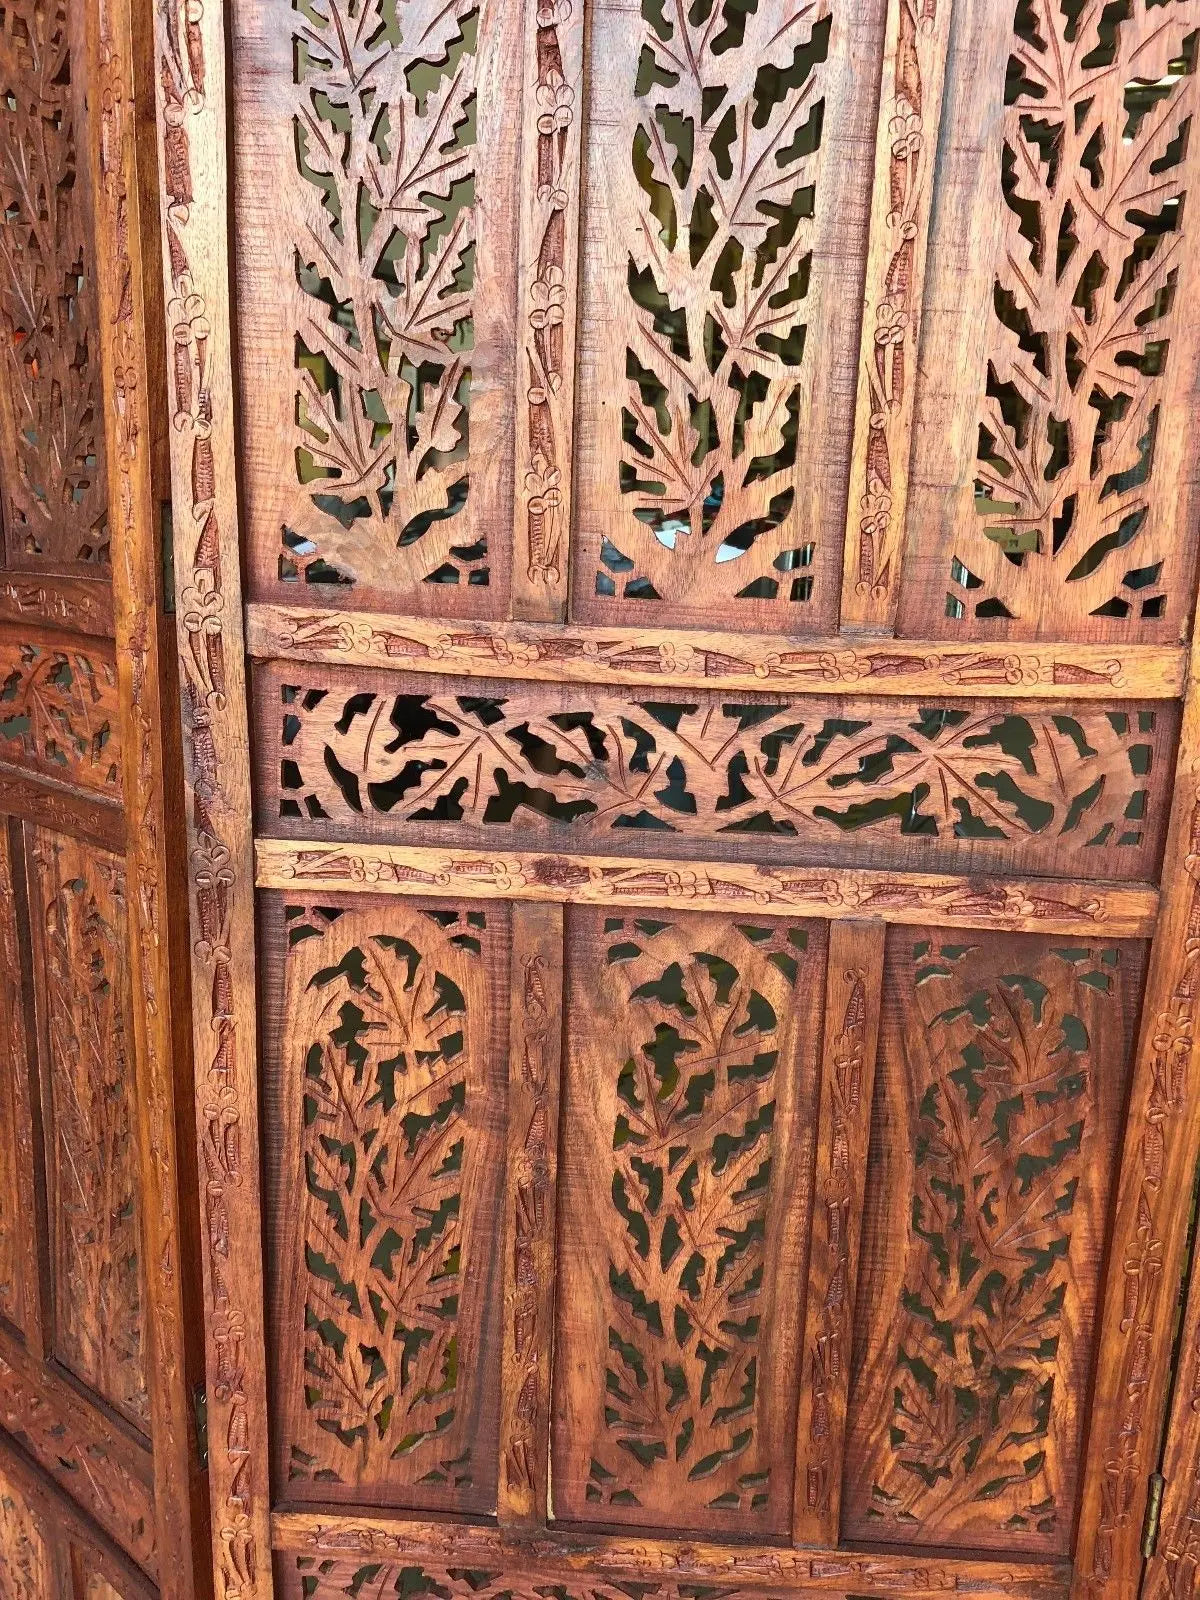 4 Panel Folding Screen Luxury Hardwood Hand-Carved Privacy Screen Room Divider everythingbamboo